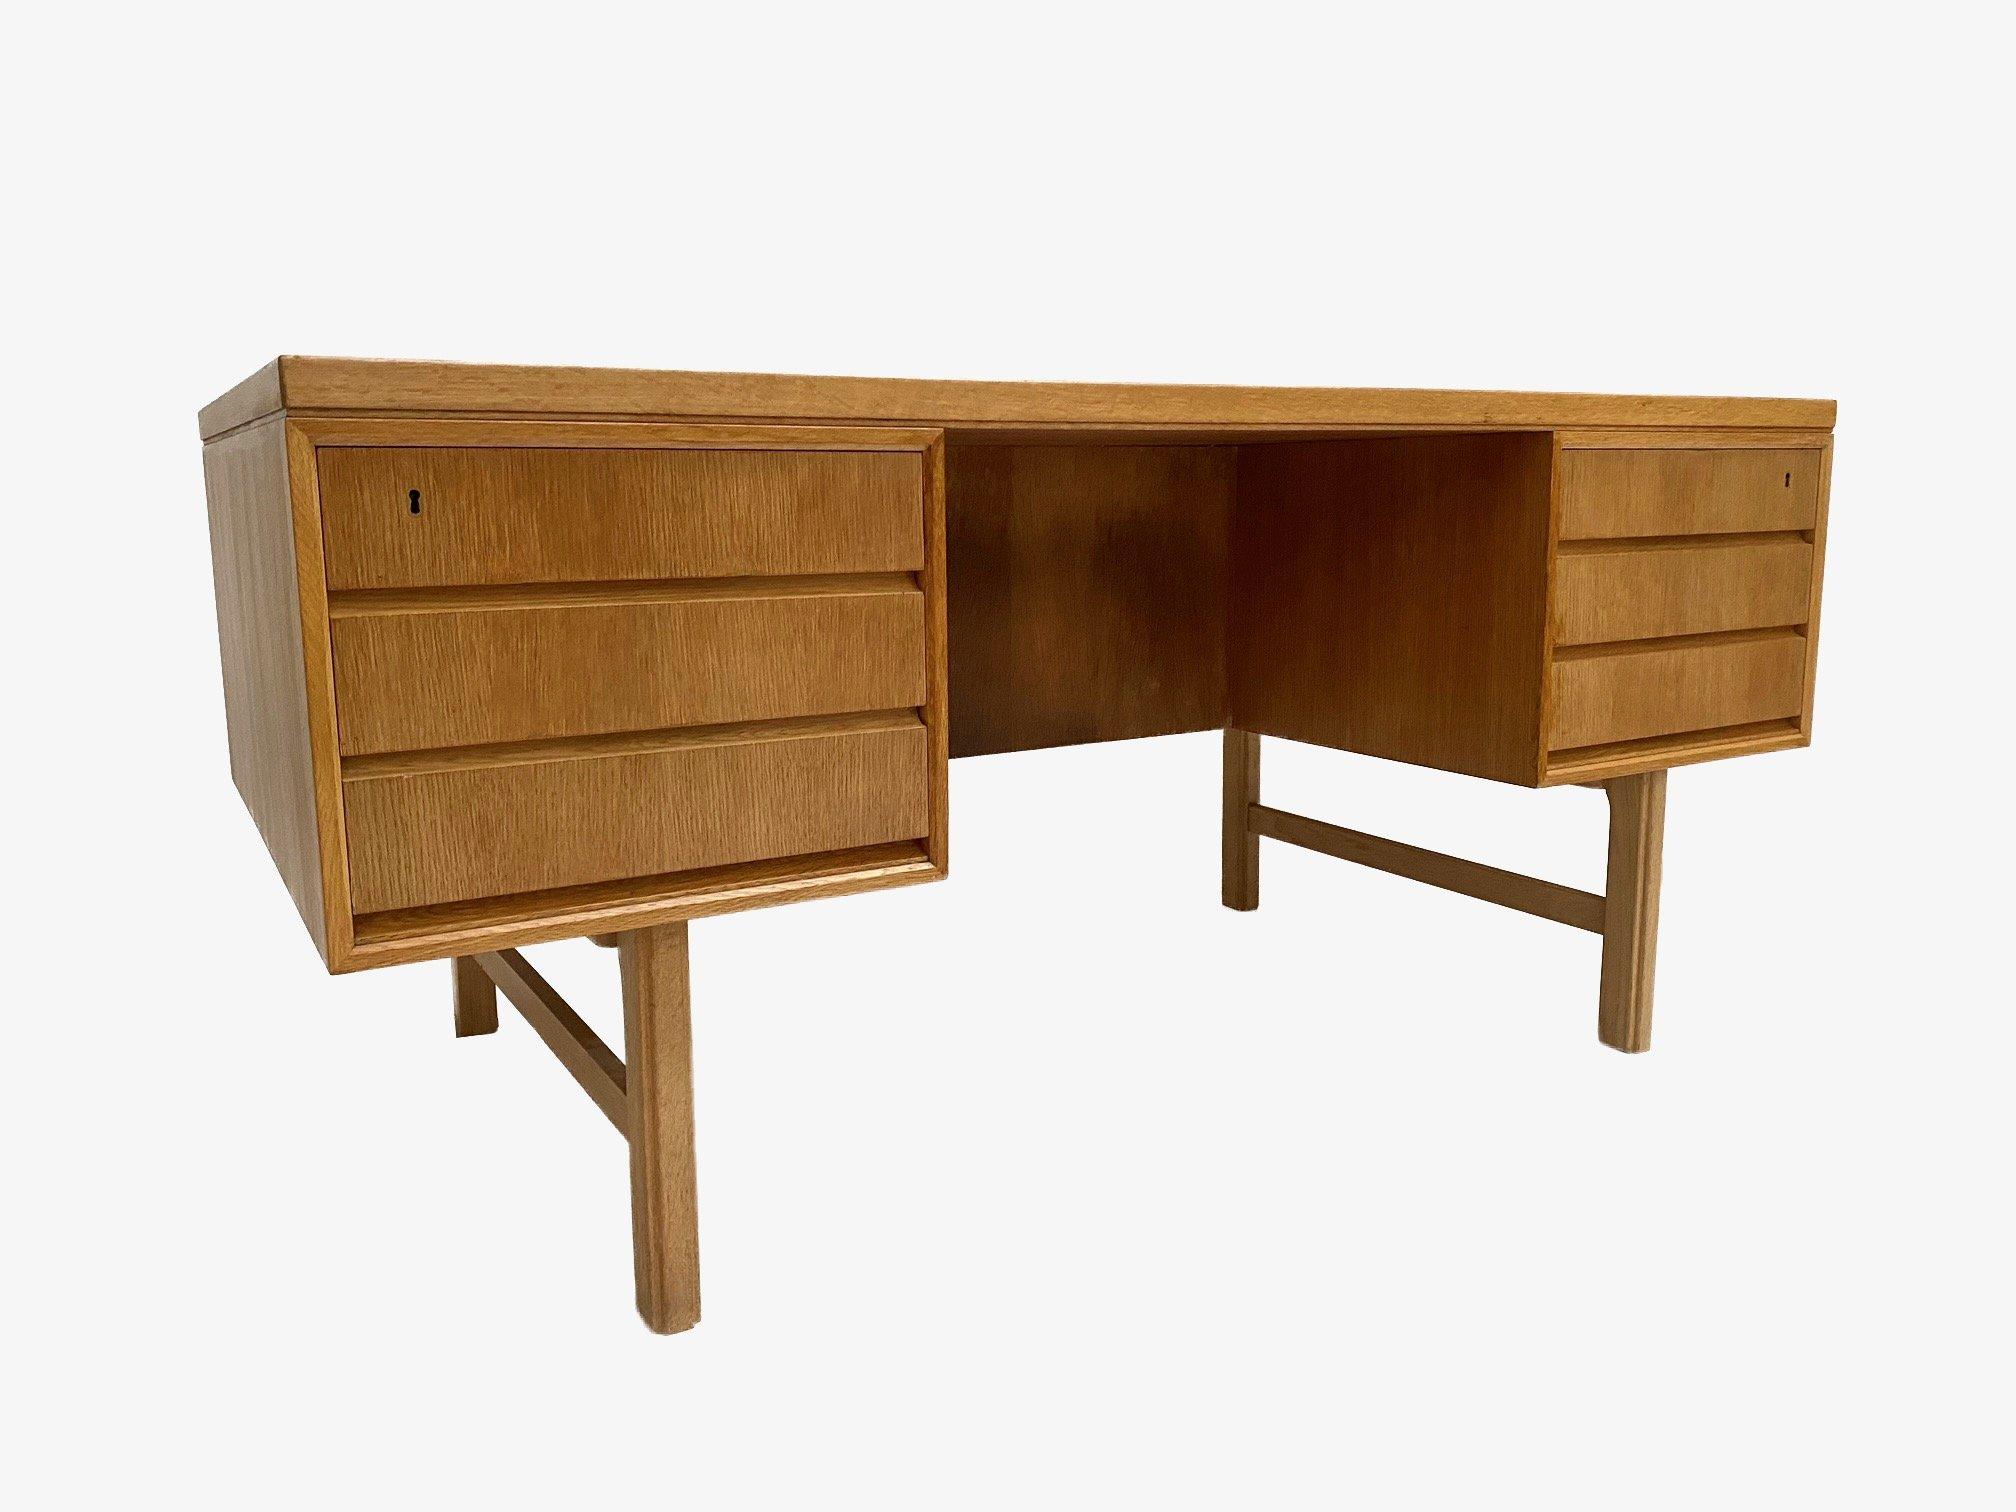 A beautiful Danish Model 76 oak desk designed by Gunni Omann for Omann Jun Møbelfabrik in the 1960s, this would make a stylish addition to any work area. A striking piece of classically designed Scandinavian furniture.

The desk has two banks of